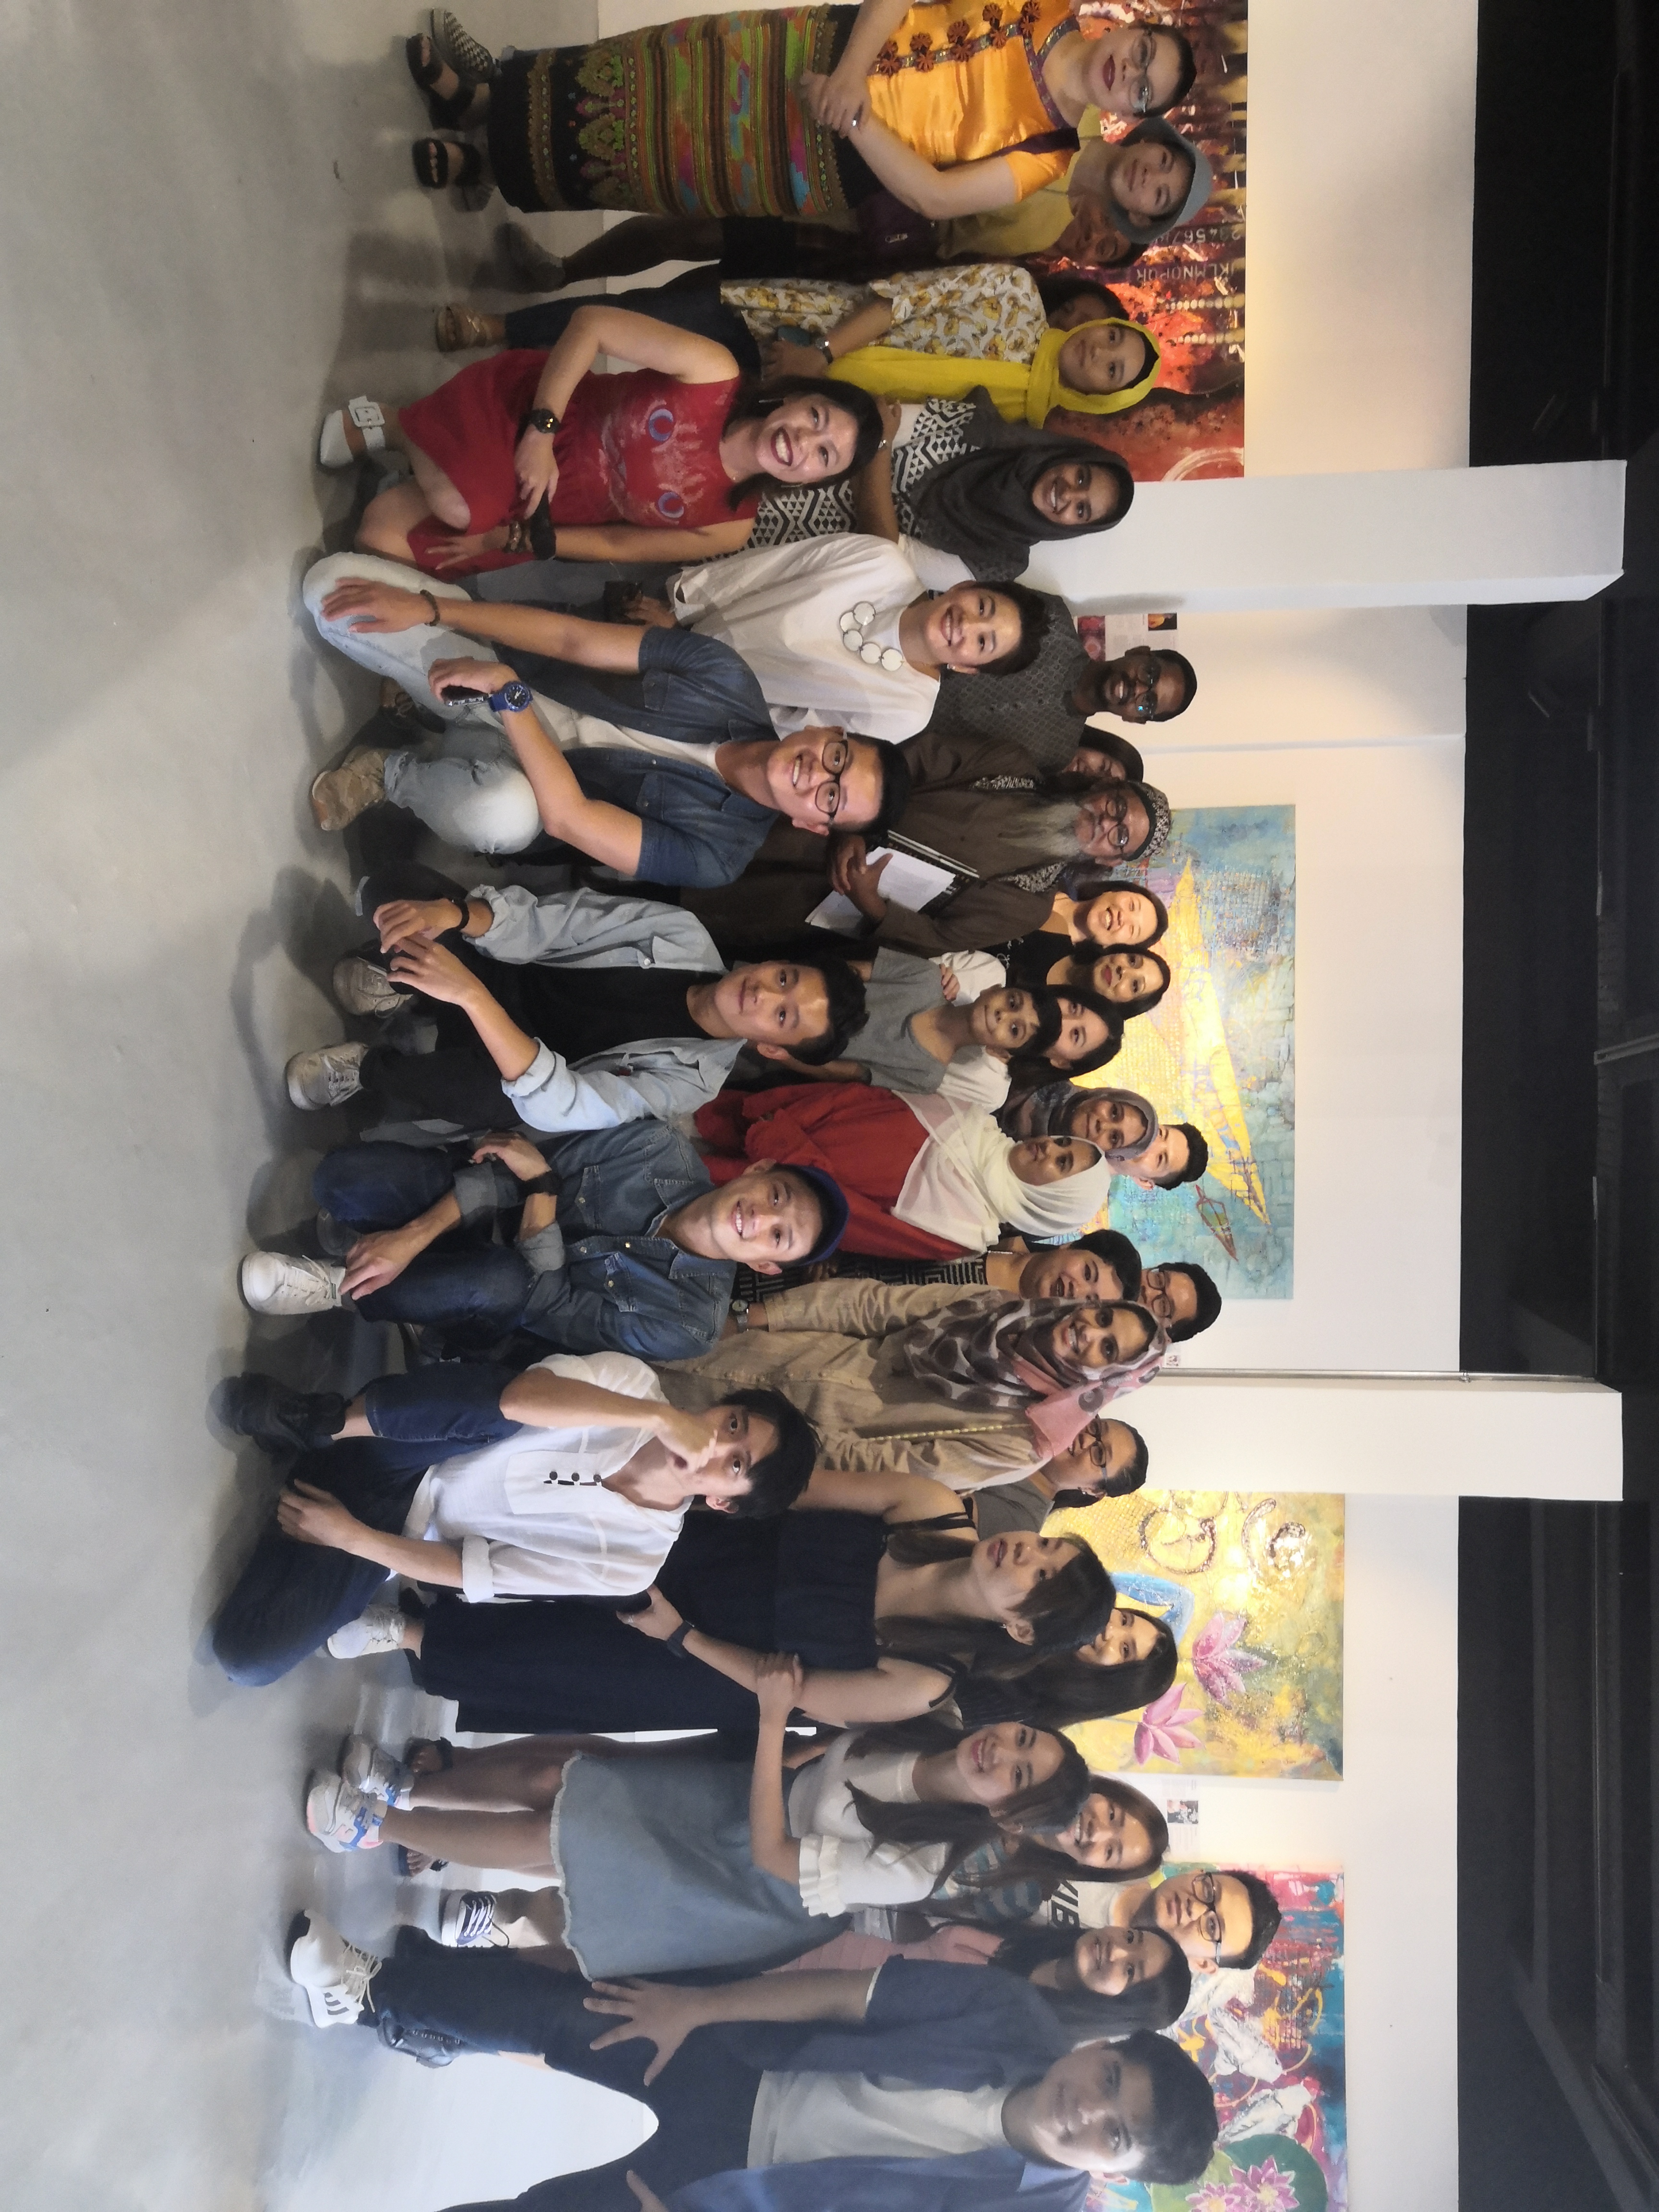 Wonderful guests, Dreams : Transcending Physical Reality Art Exhibition, Inner Joy Art Gallery, Malaysia 